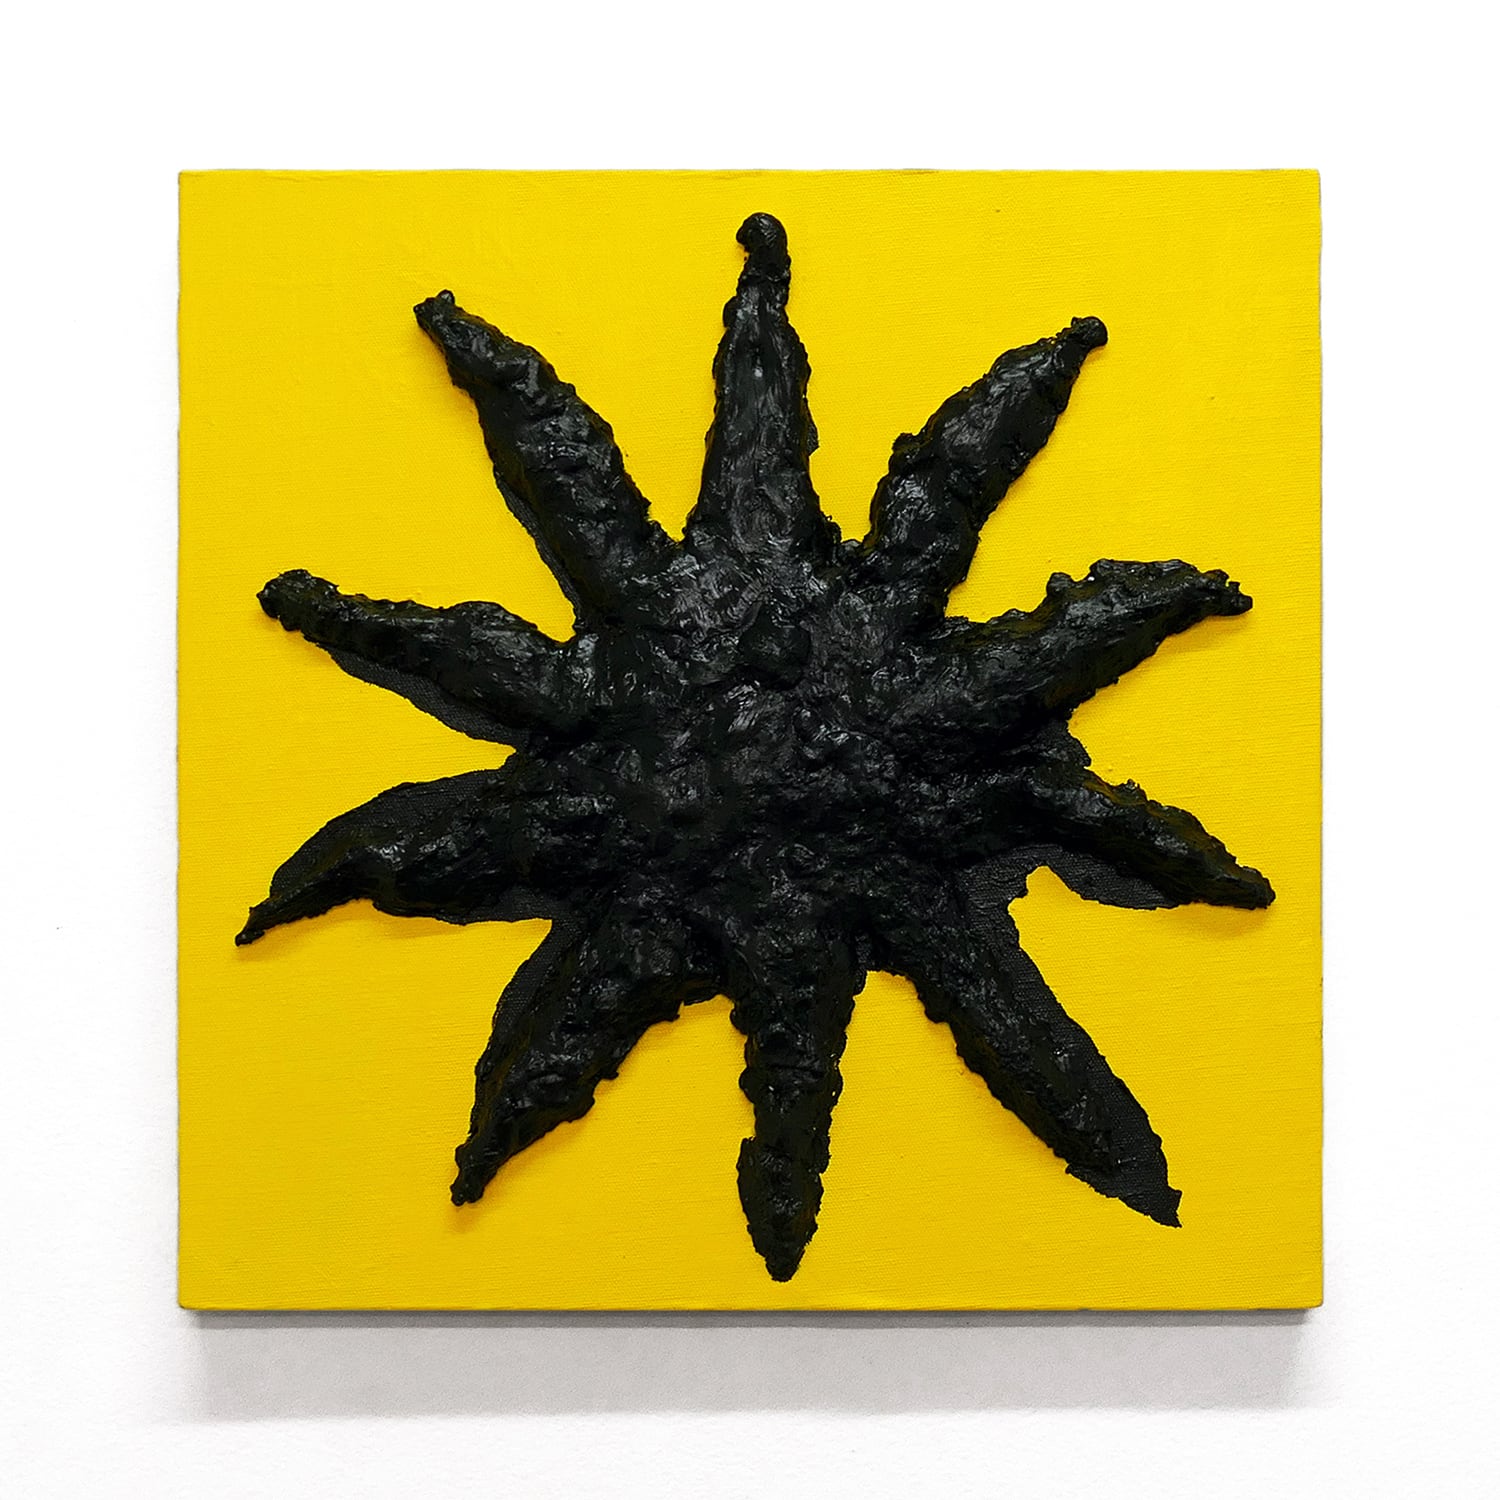 Image 03: Sean Bailey, Untitled (2018) hydrostone, spray paint and acrylic on linen board, 42 x 42 cm. Courtesy the artist.